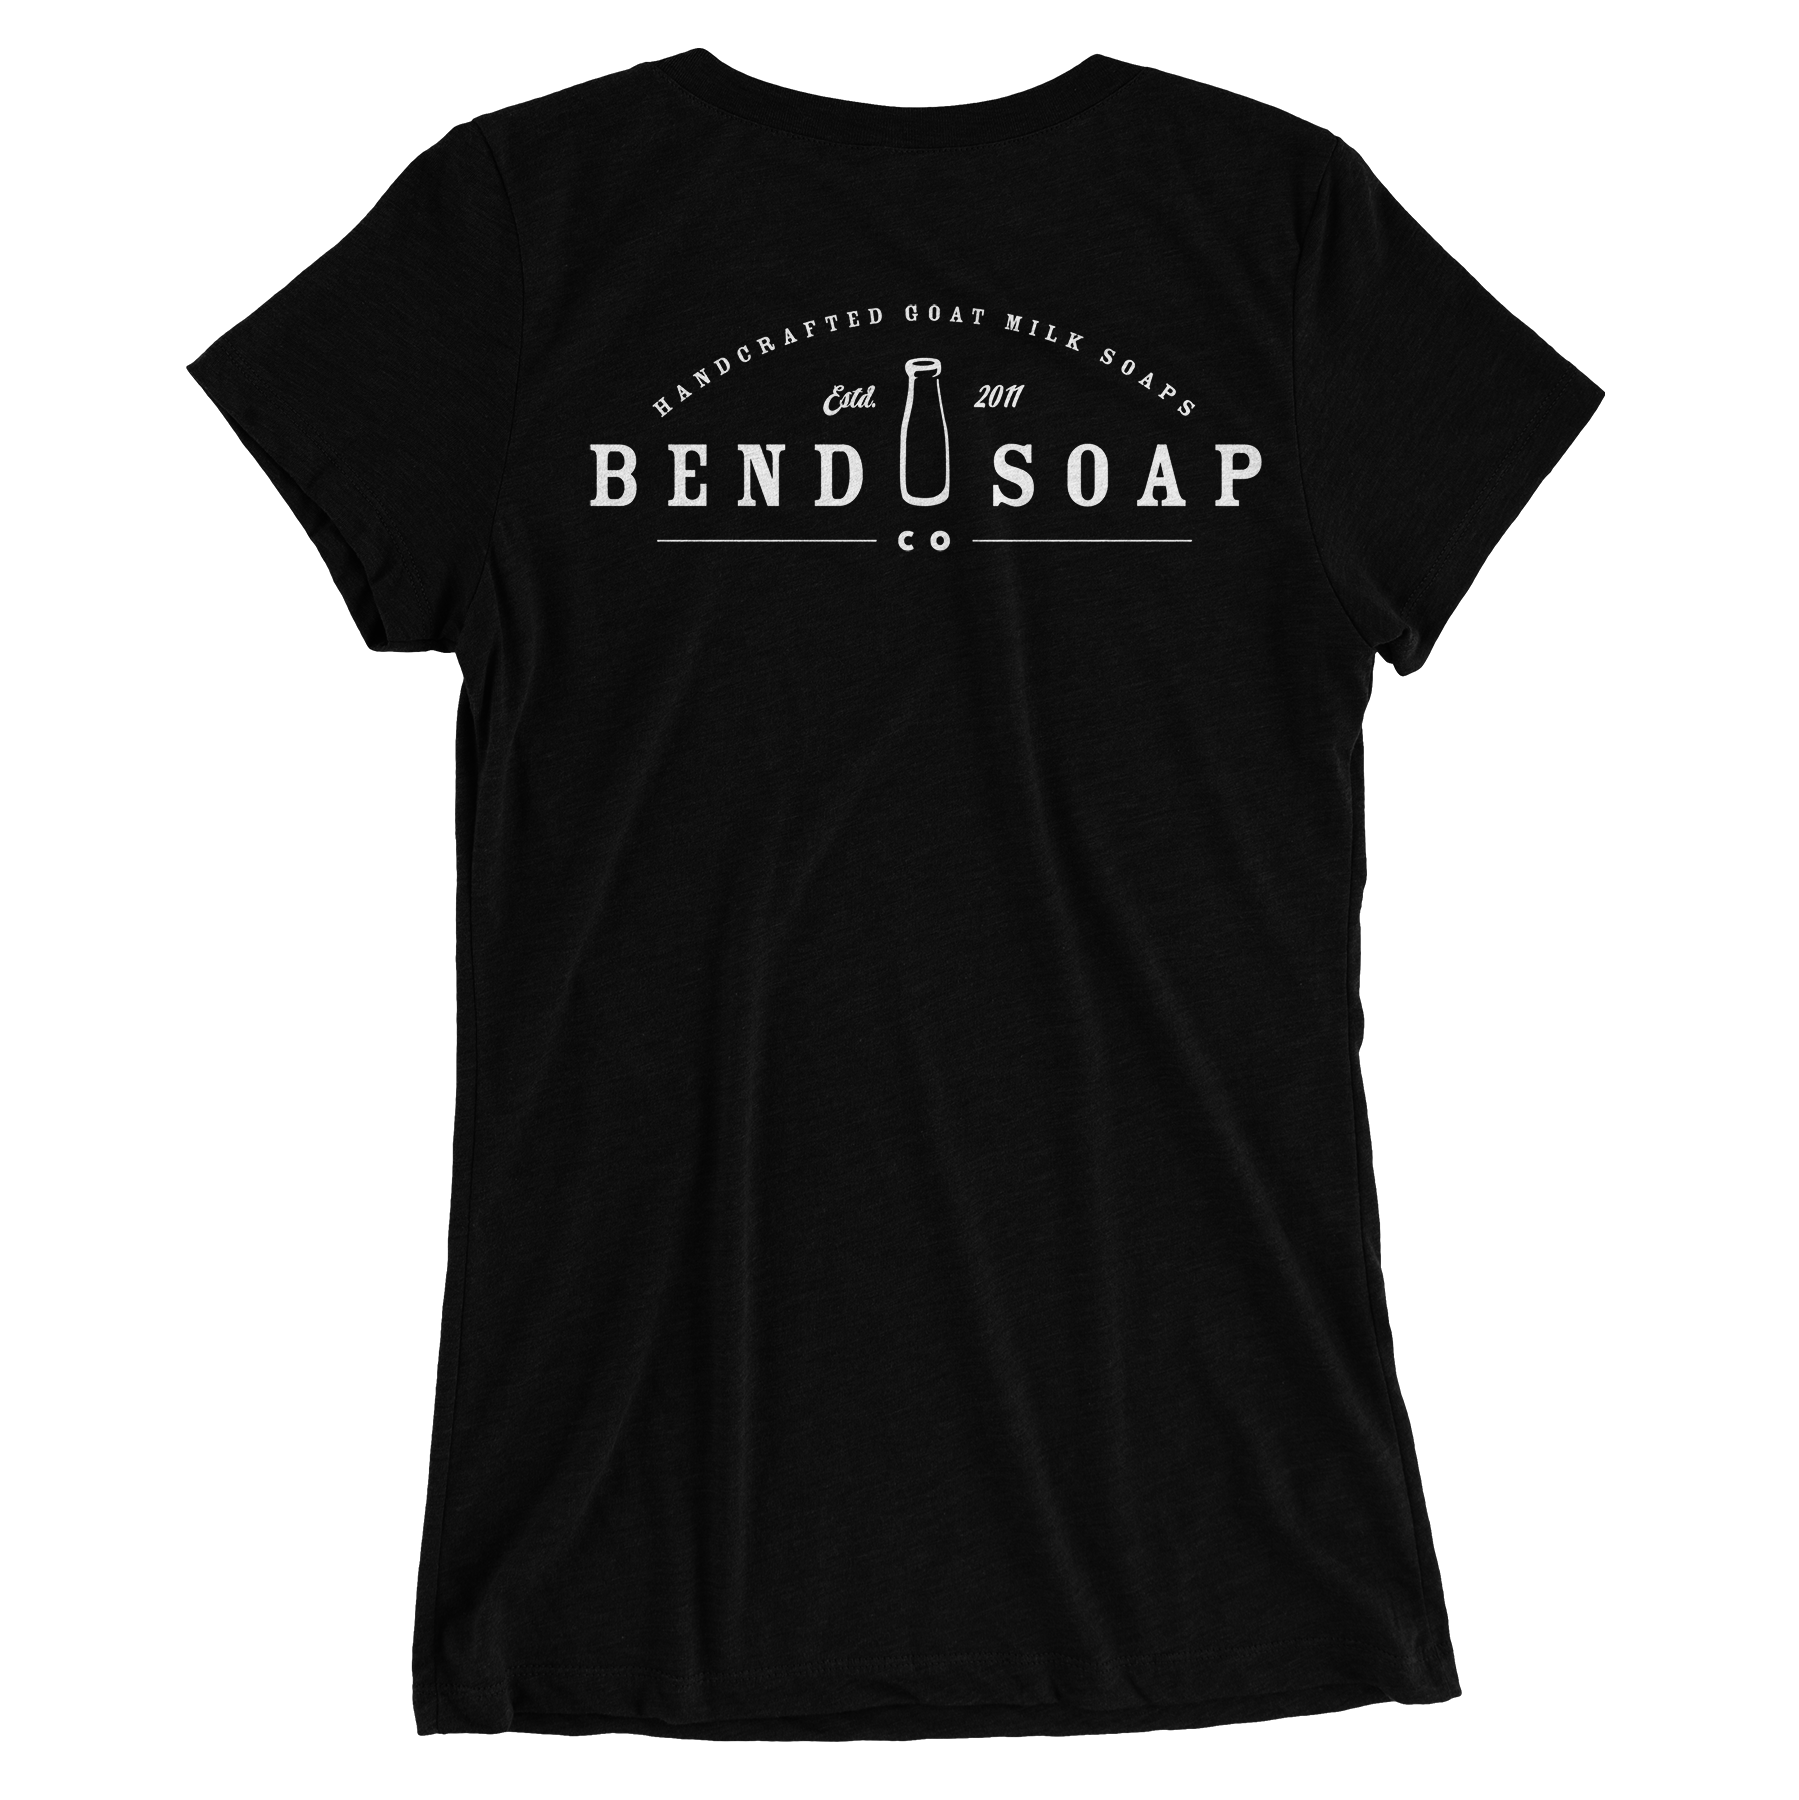 Back view of the Black Female Bend Soap Tee-shirt  